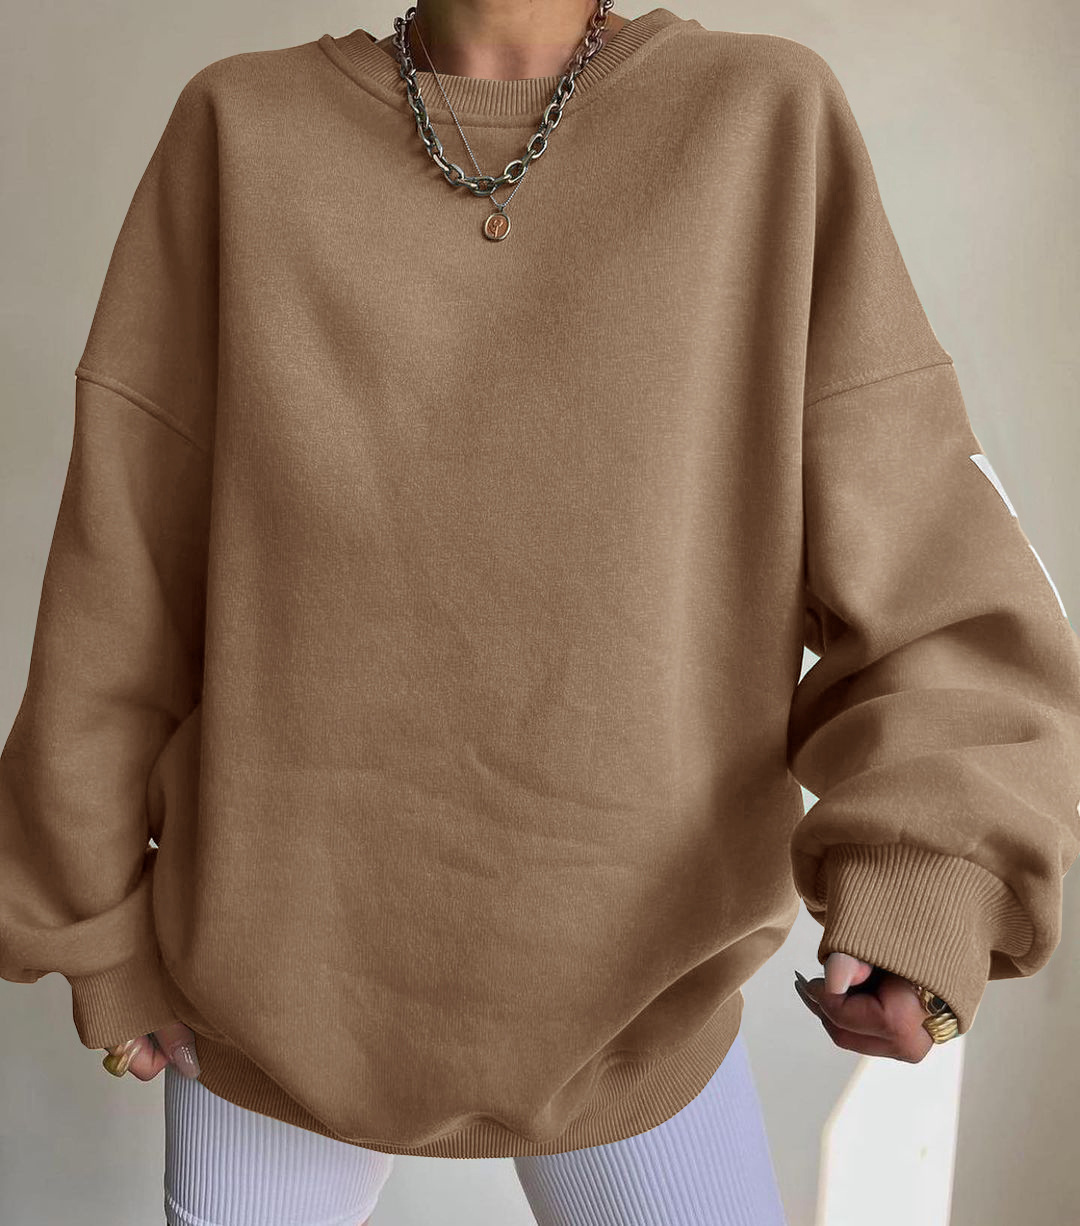 Fashion Letter Print Thickened Casual Long Sleeve Pullover Sweatshirt